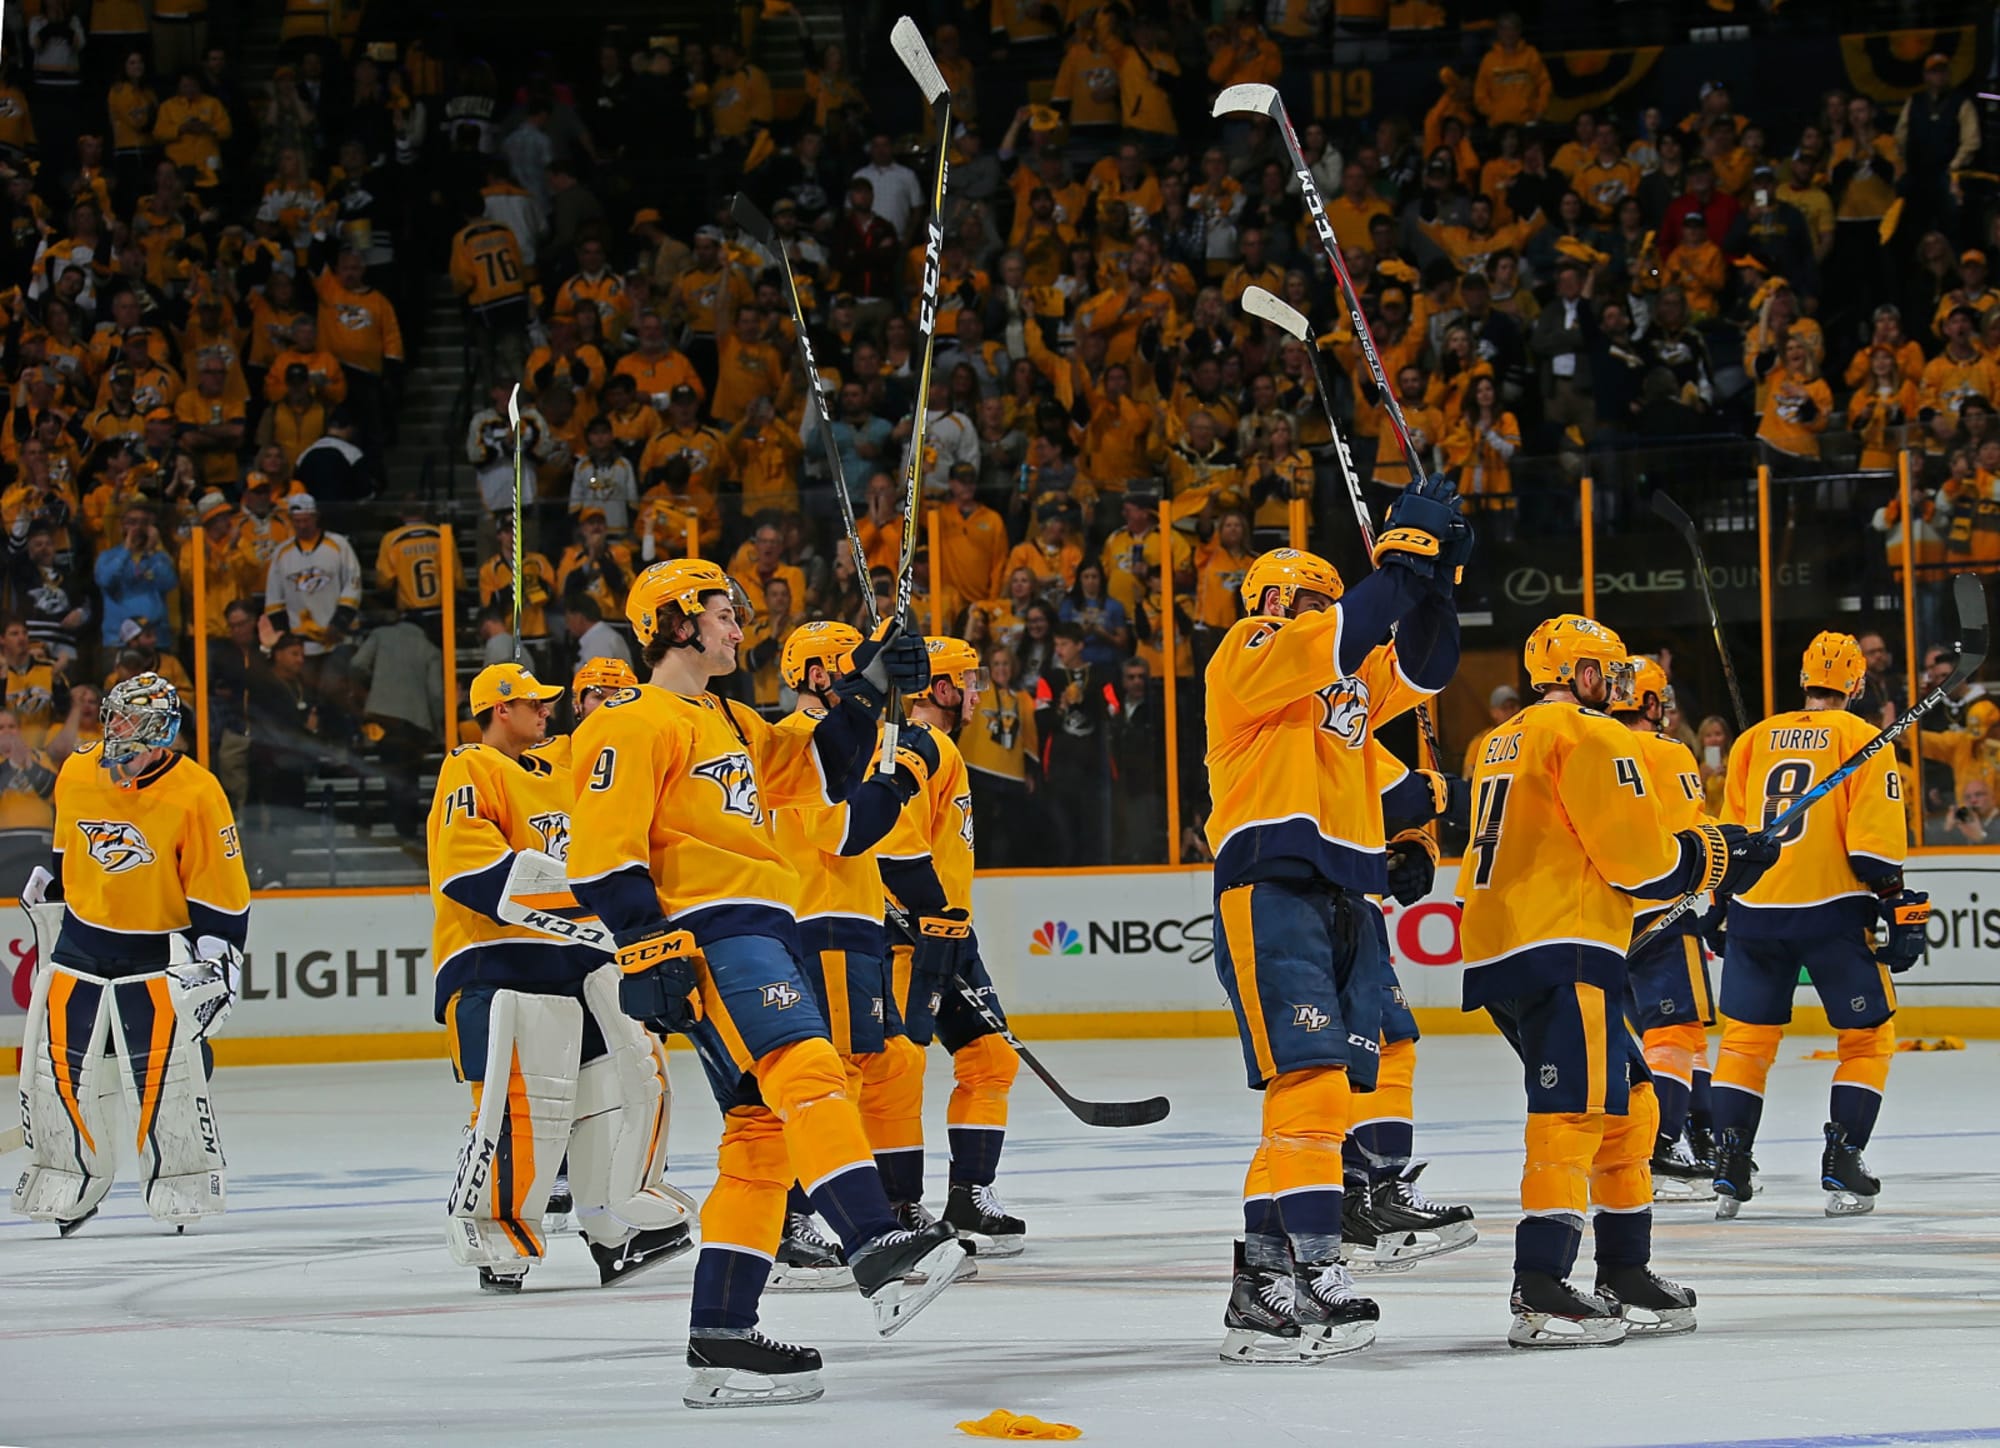 Predators vs. Avalanche Game 1 Full highlights, final score and more